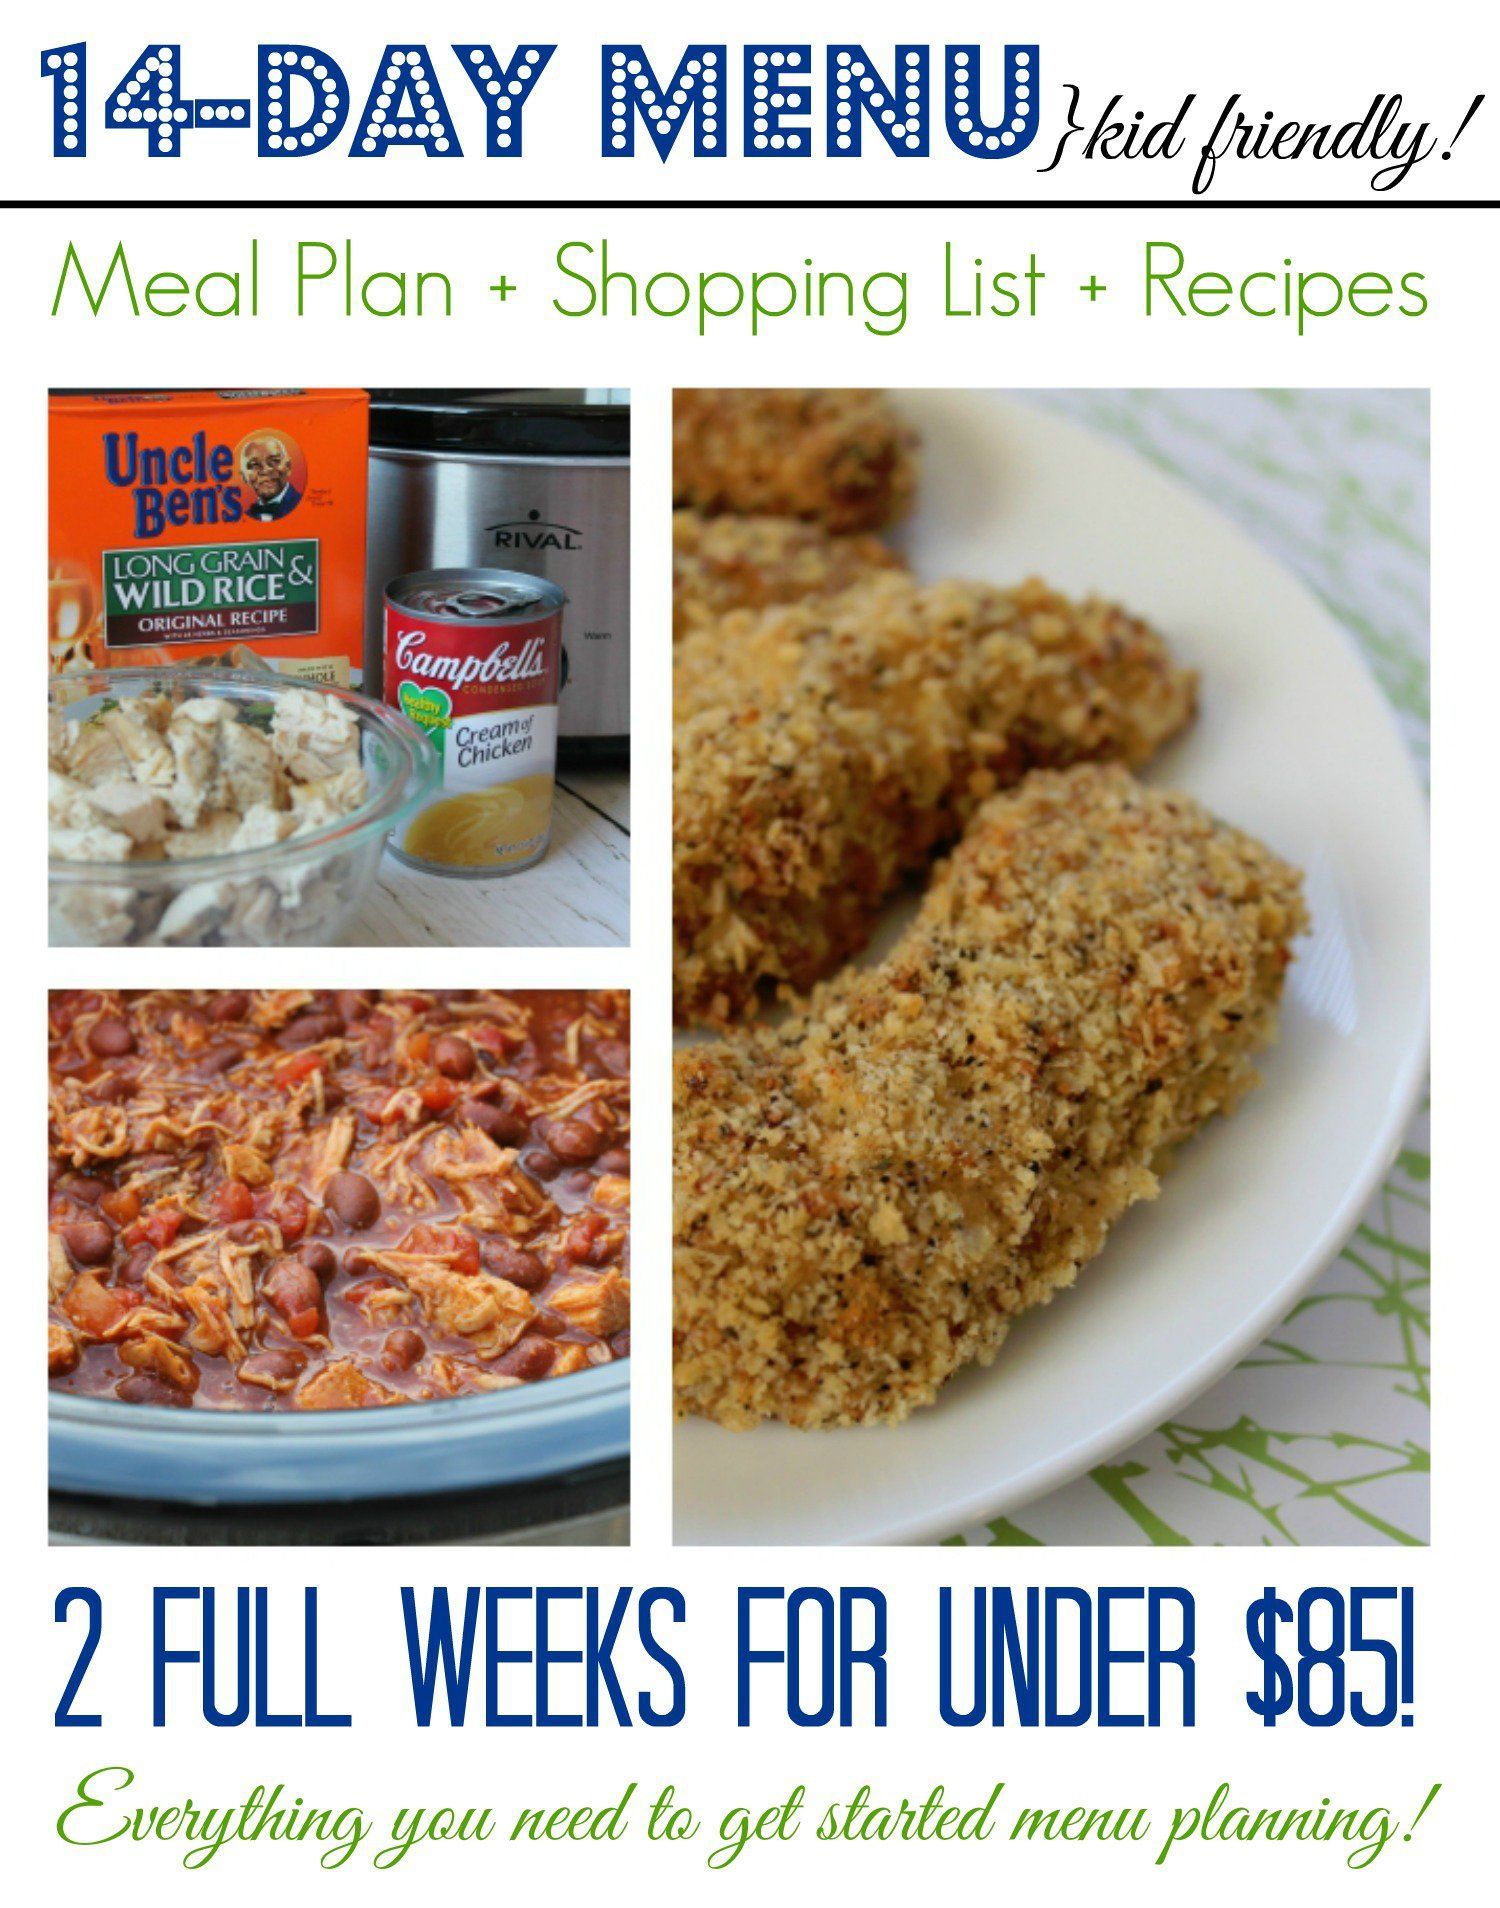 I am SUPER Excited to share this new 2 Week Meal Plan with you because I have gotten so many questions about meal planning and How to Make a Meal Plan. This is something I'm passionate about because I really believe Planning your meals is one of the Quickest ways to save money! It doesn't matter what your budget is, if you have a plan going into the store then sticking to your shopping list is so much easier and you'll avoid all those extra impulse purchases. -   25 2 week families
 ideas